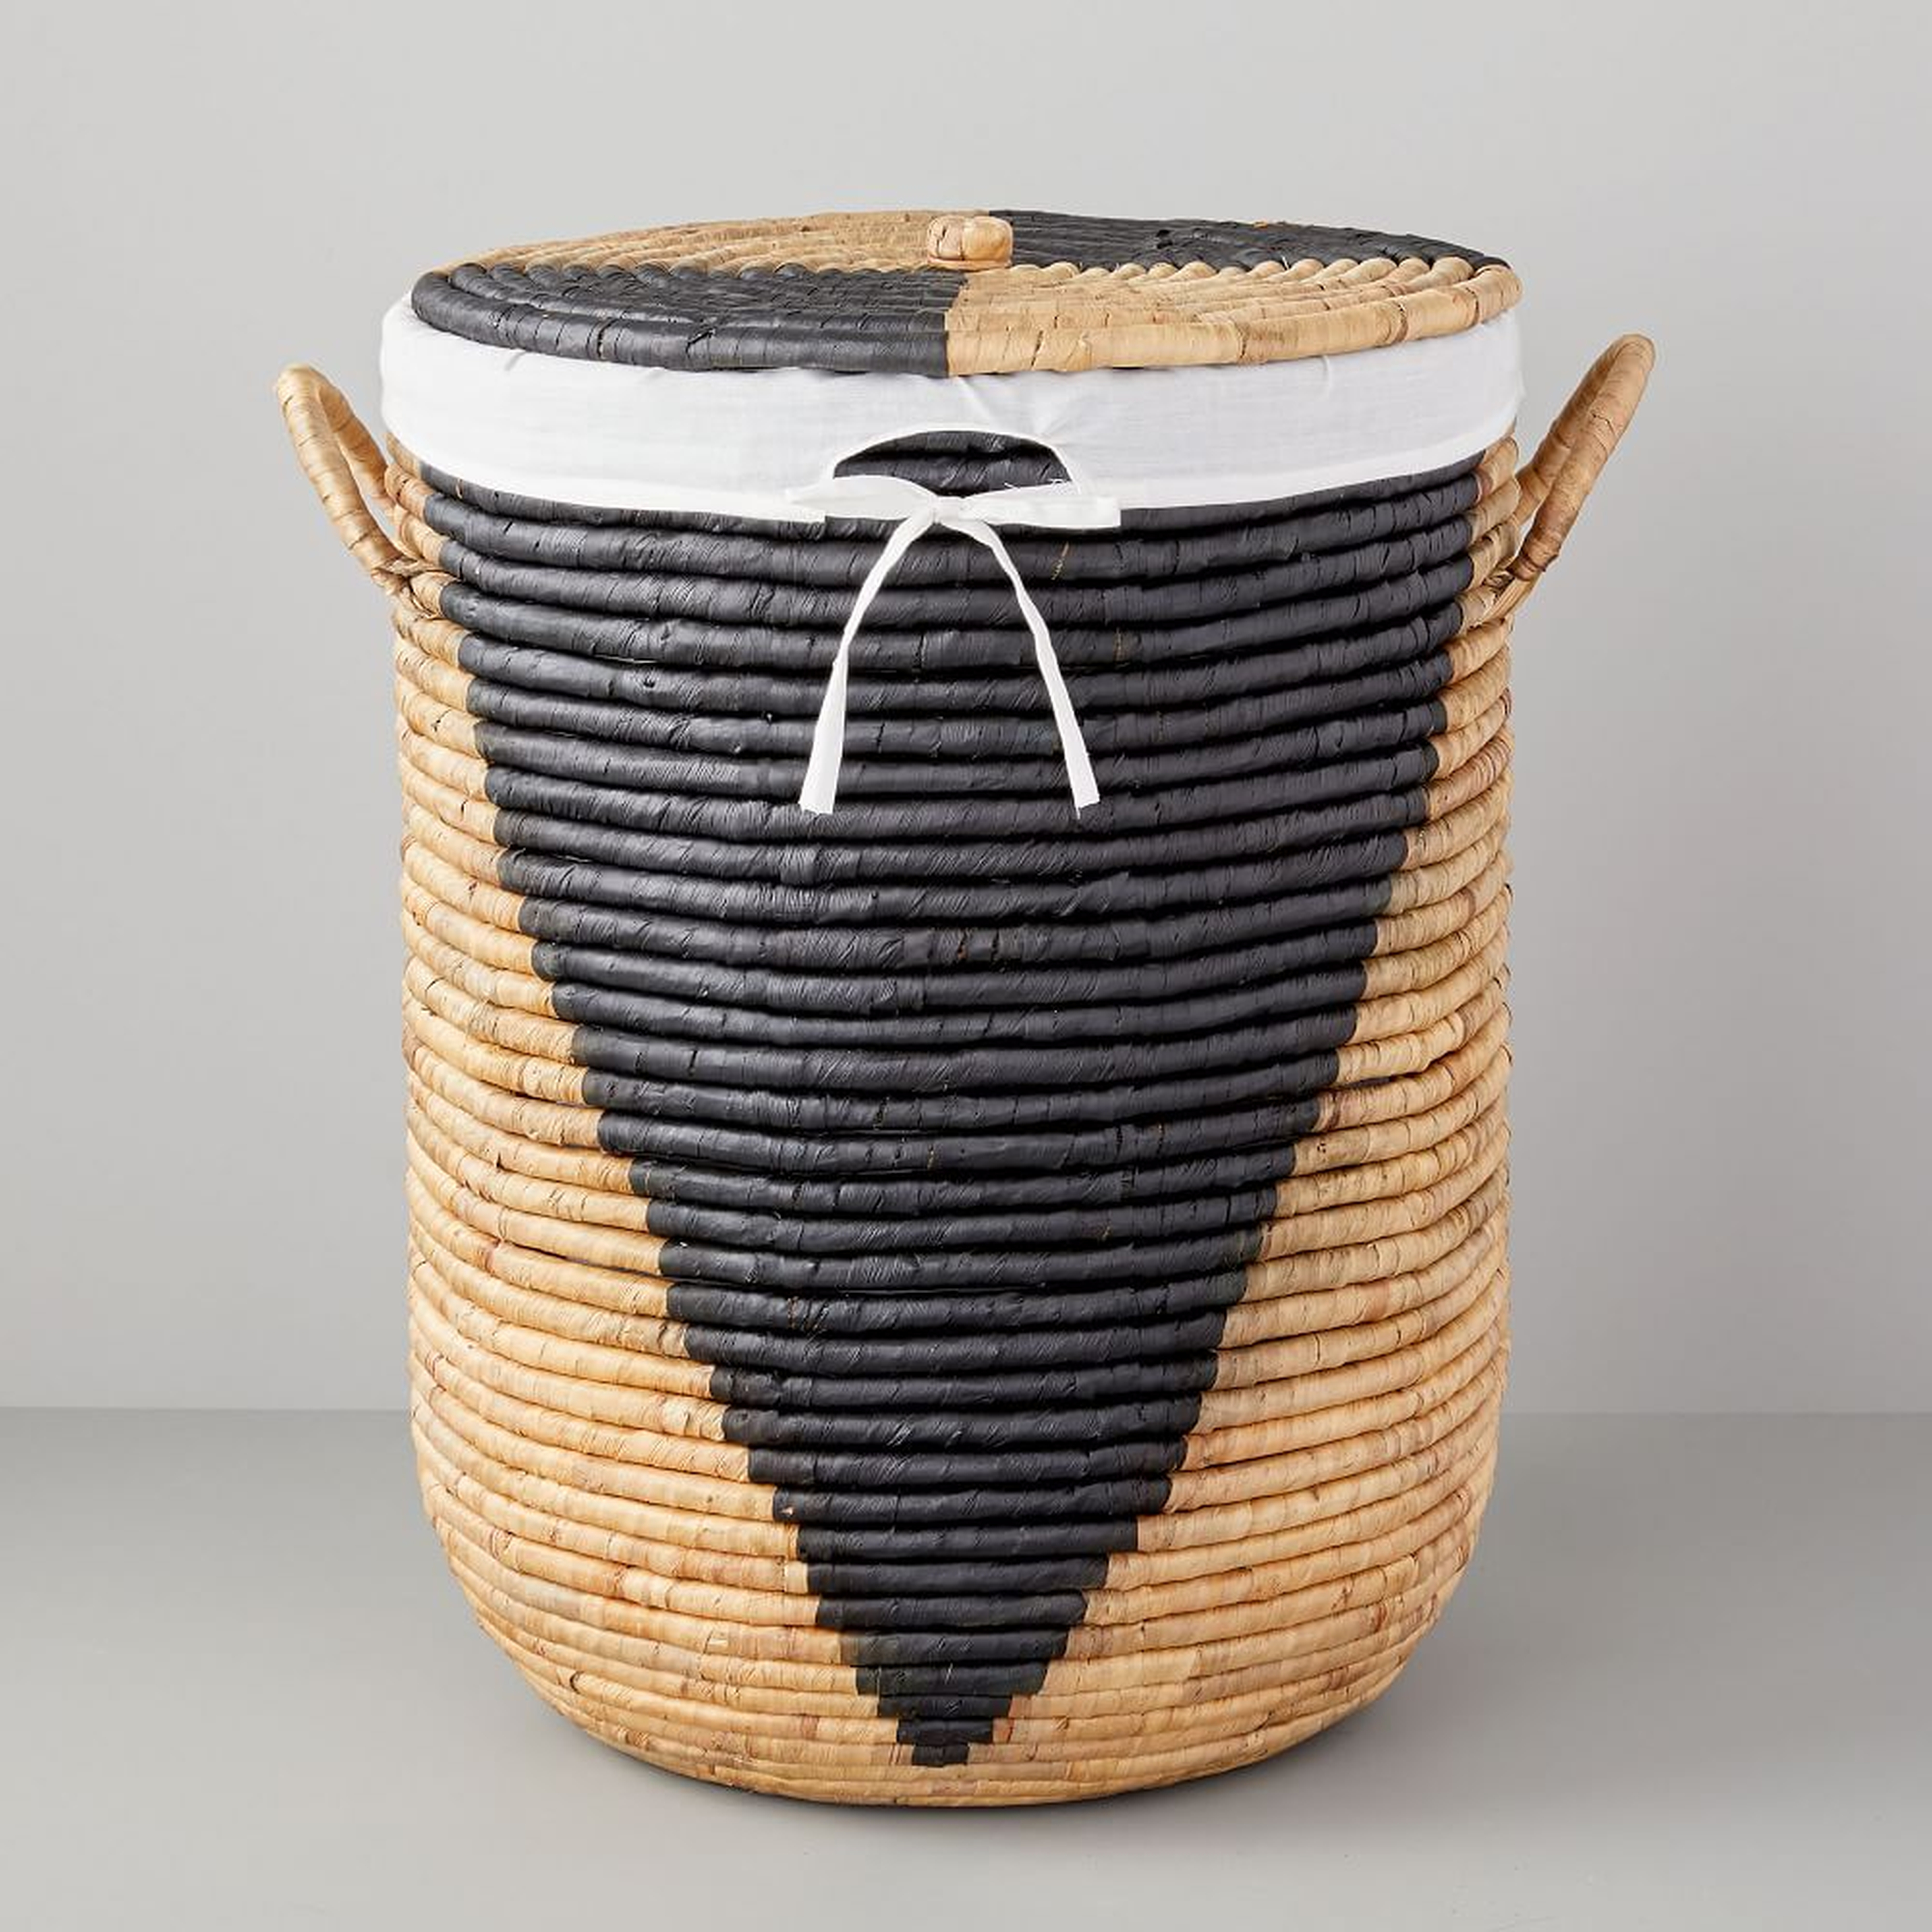 Two-Tone Woven Seagrass, Hamper, Large, 18.9"W x 24.4"H - West Elm